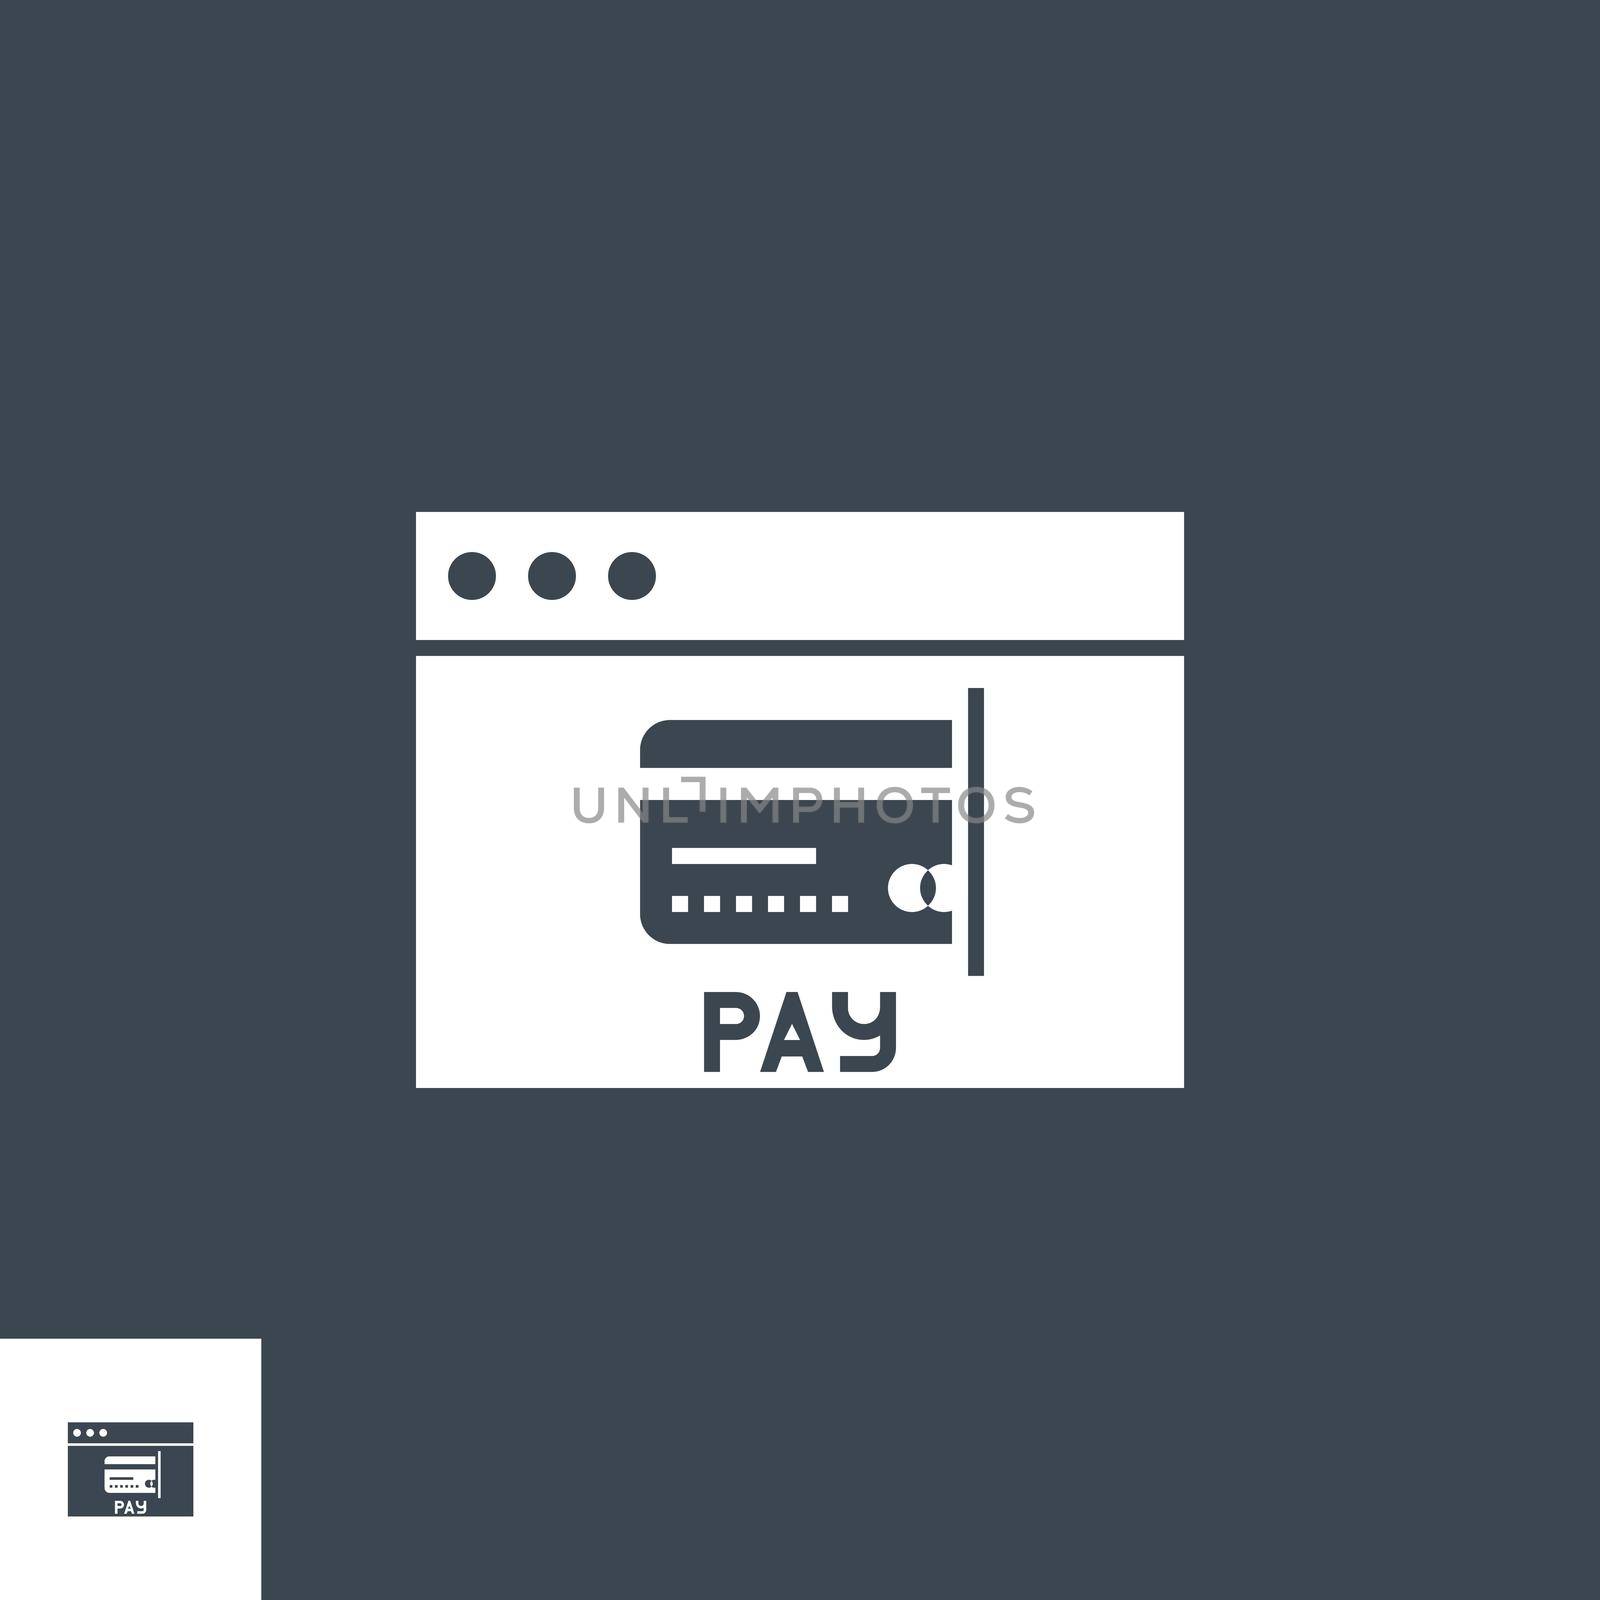 On Pay related vector glyph icon. by smoki